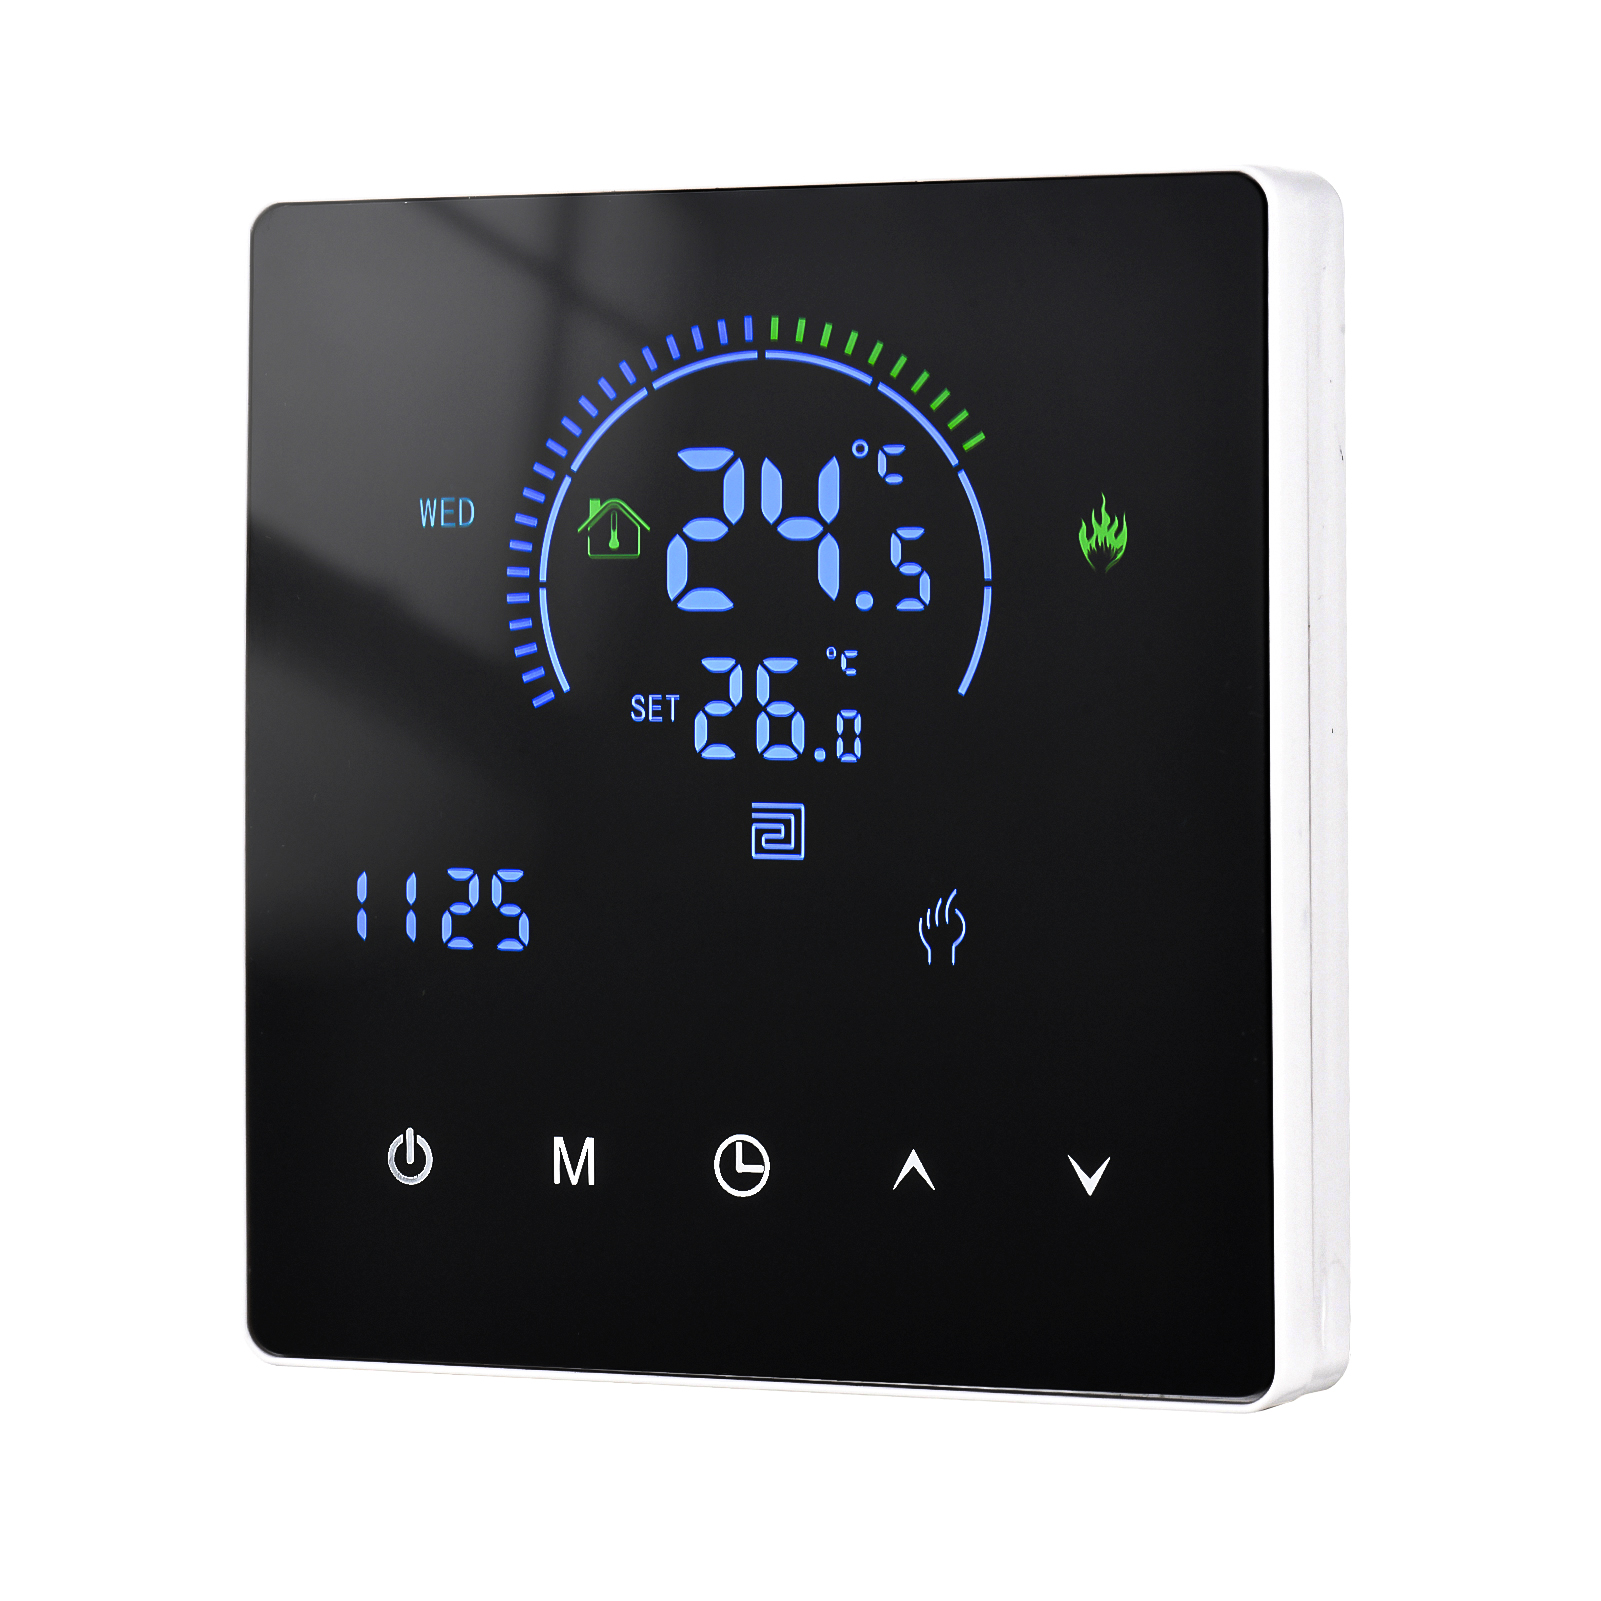 Tomshoo Ultra Thin Smart Thermostat Temperature Controller for Water Heating Button & LCD Display - image 1 of 7